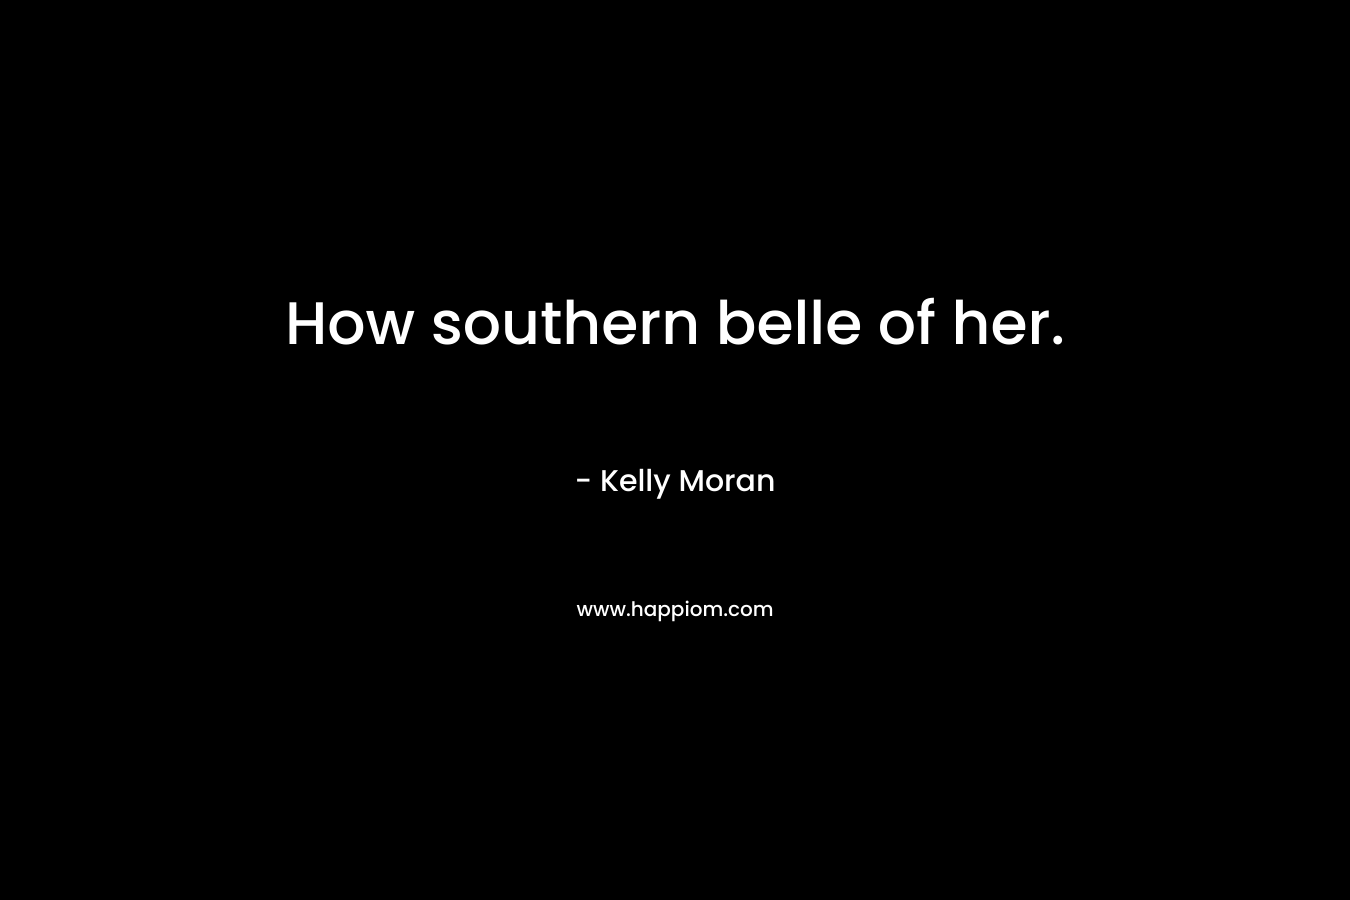 How southern belle of her.